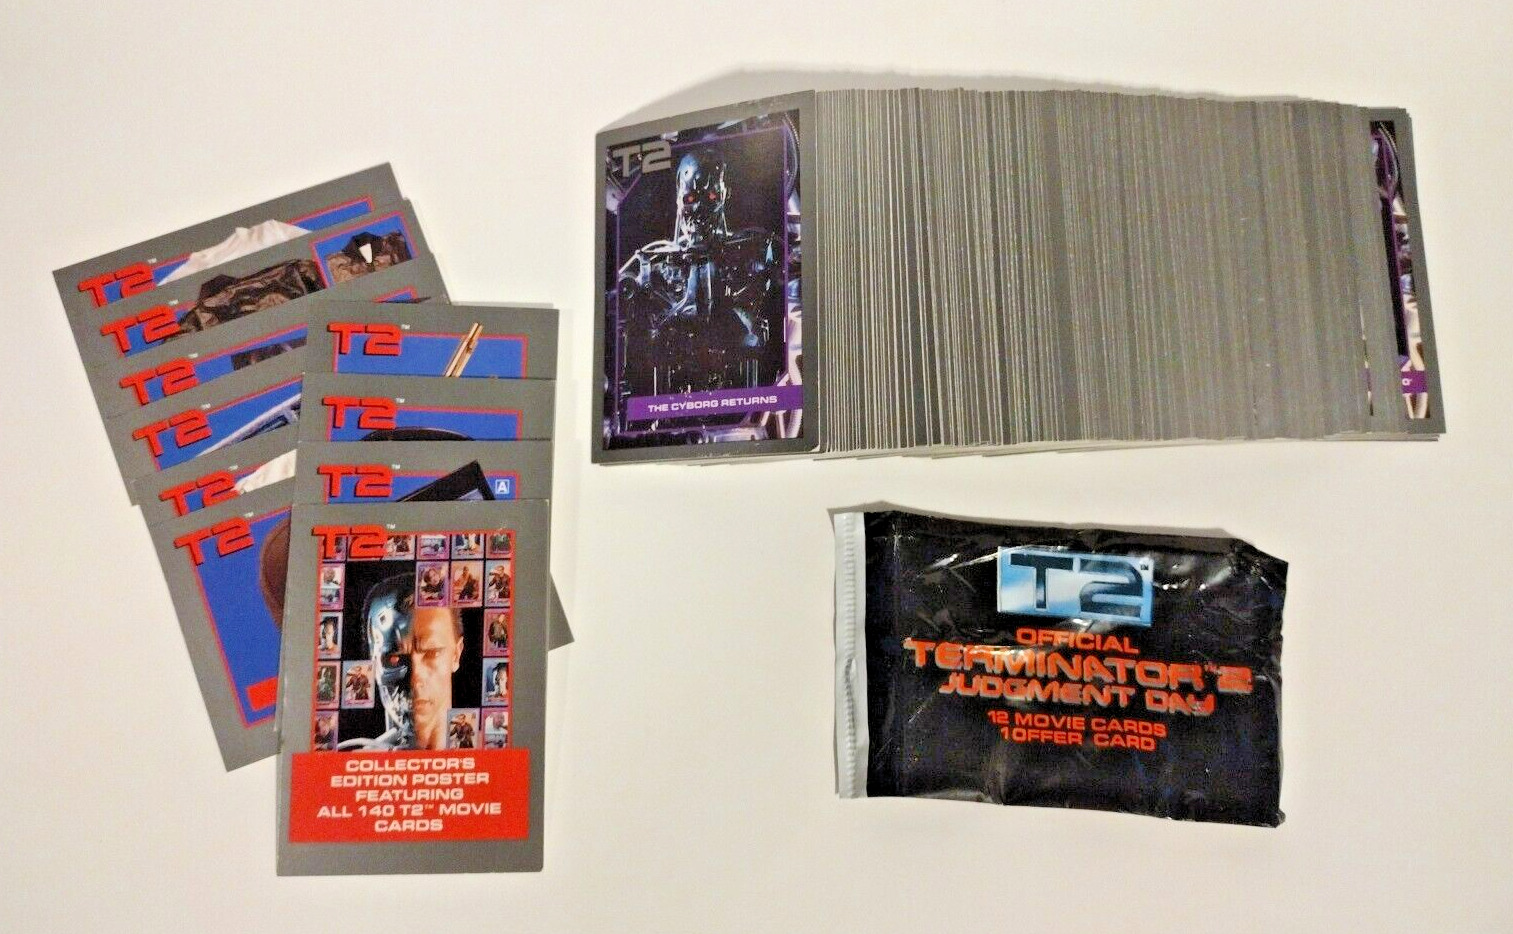 1991 TERMINATOR 2 JUDGMENT DAY TRADING CARDS 140 + 10 Offer cards FULL SET